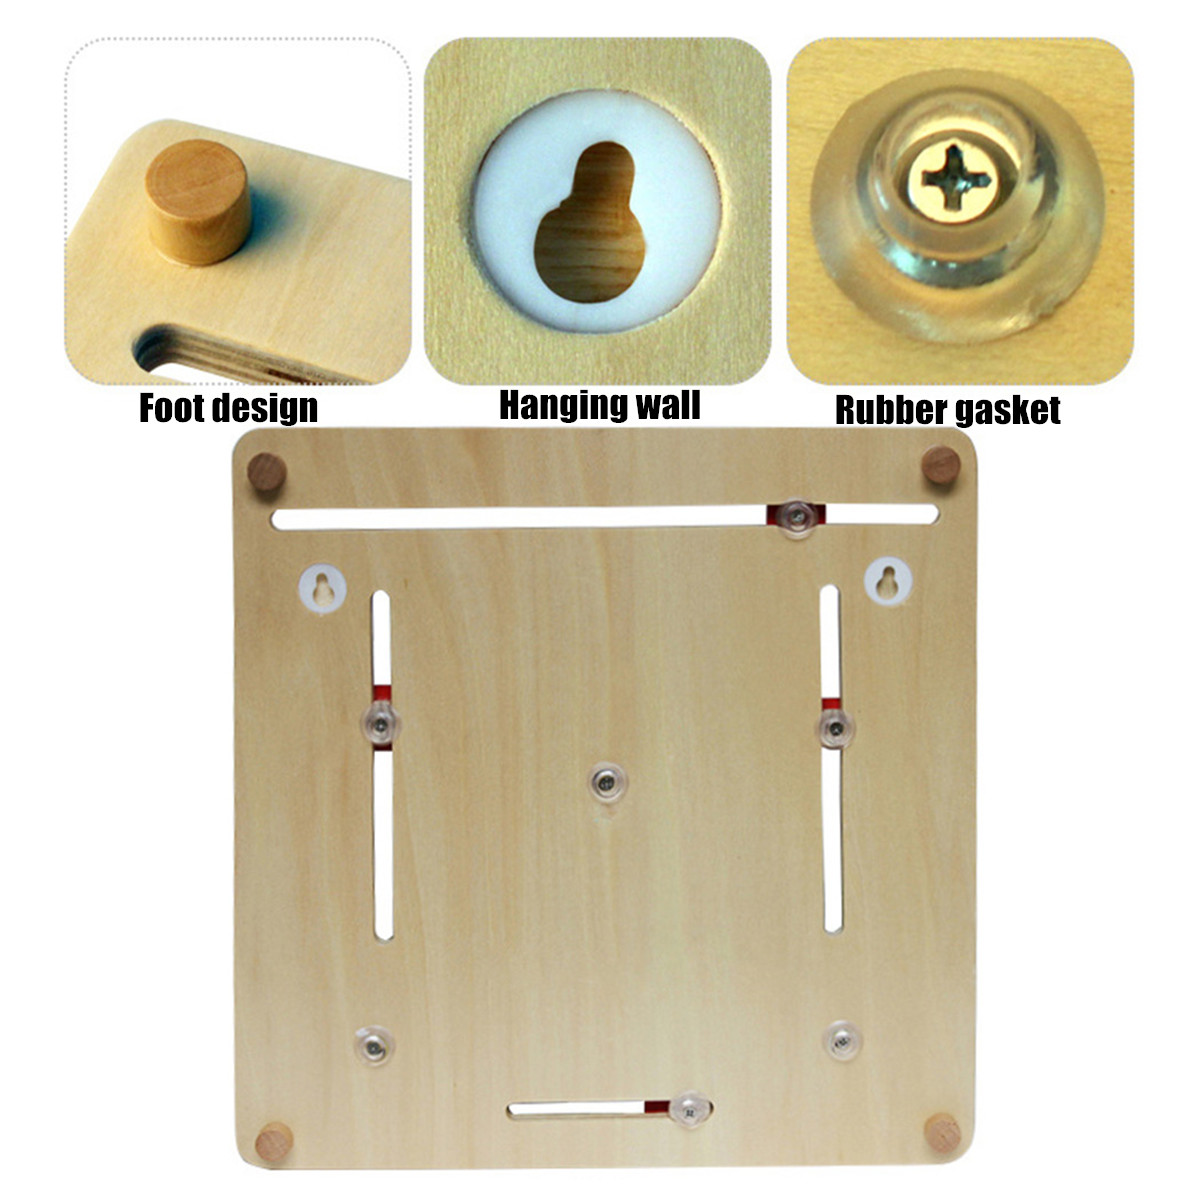 Wooden-Multifunction-Learning-Clock-Toy-Alarm-Calendar-Cognition-Educational-Toys-1550385-9